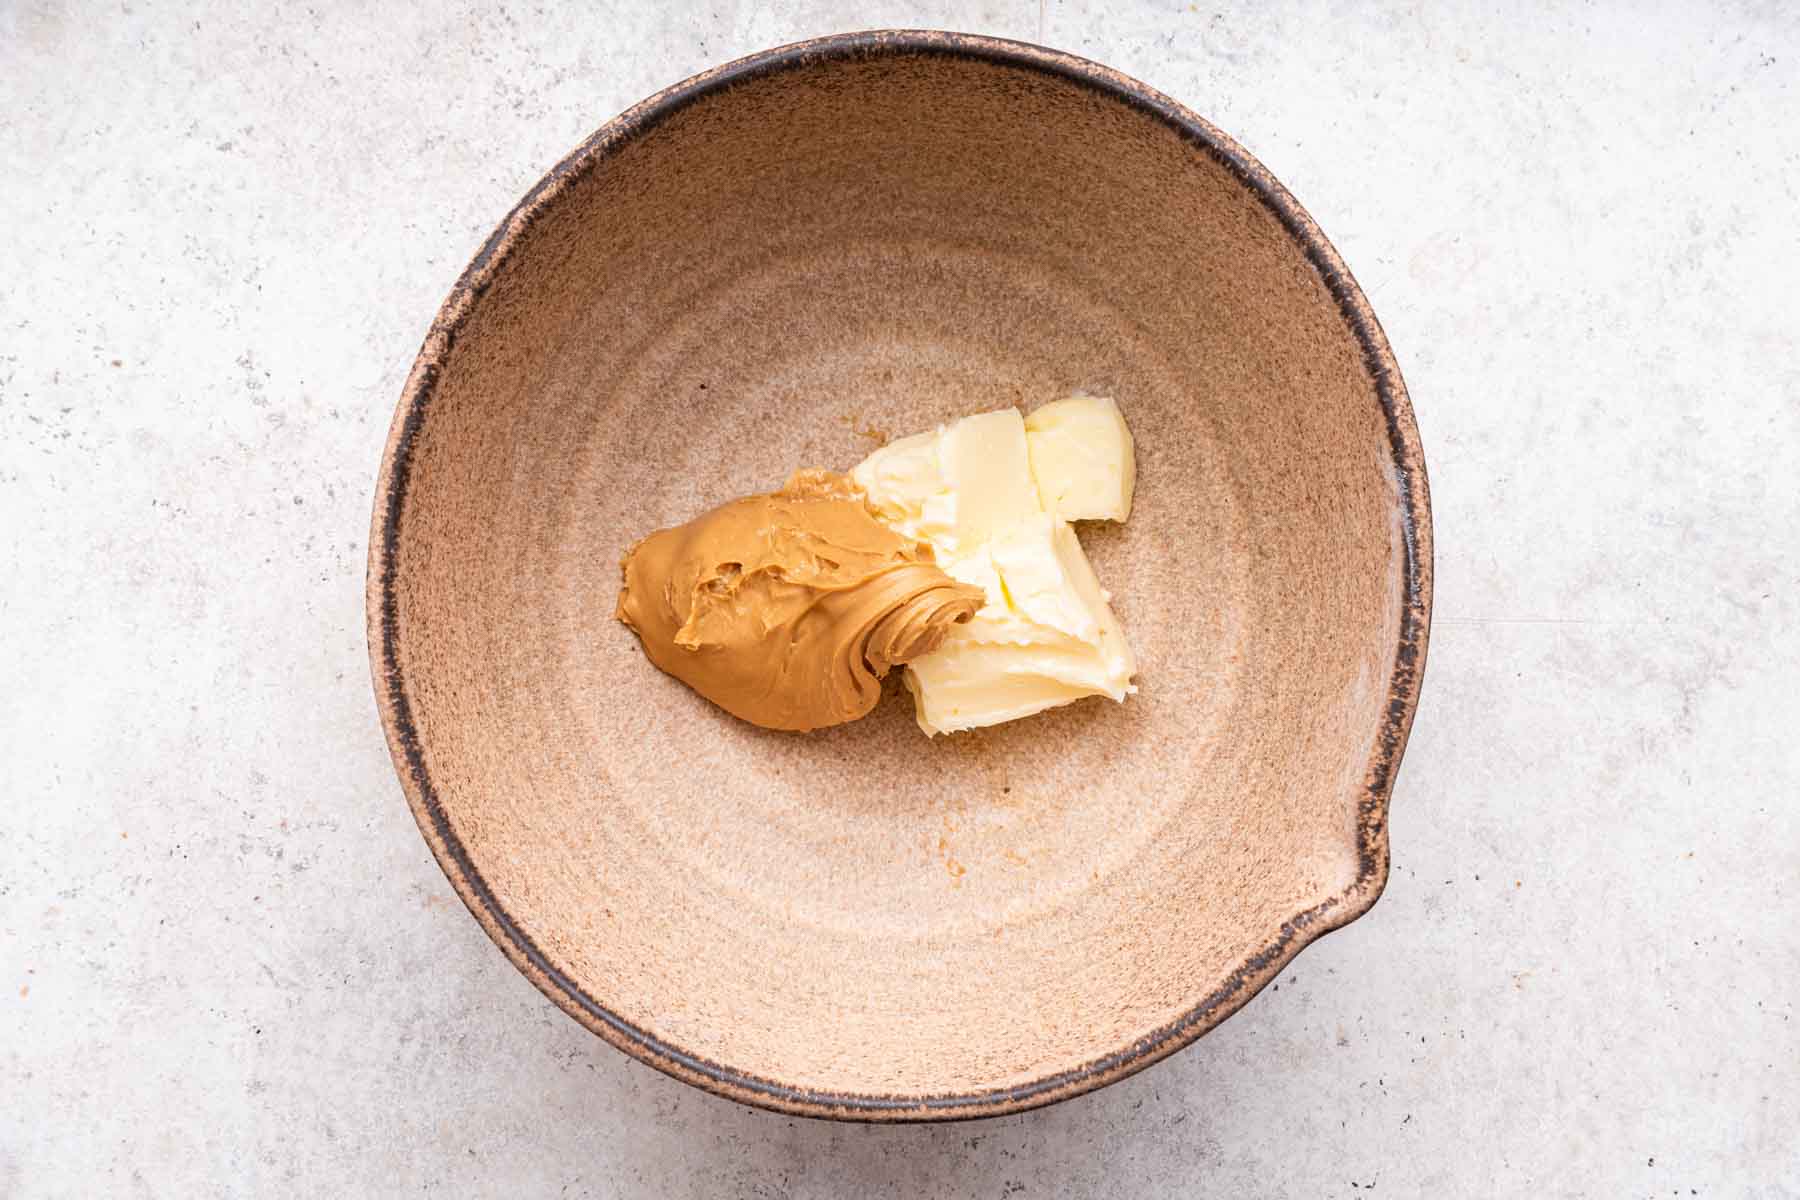 Peanut butter and softened butter in a brown mixing bowl.